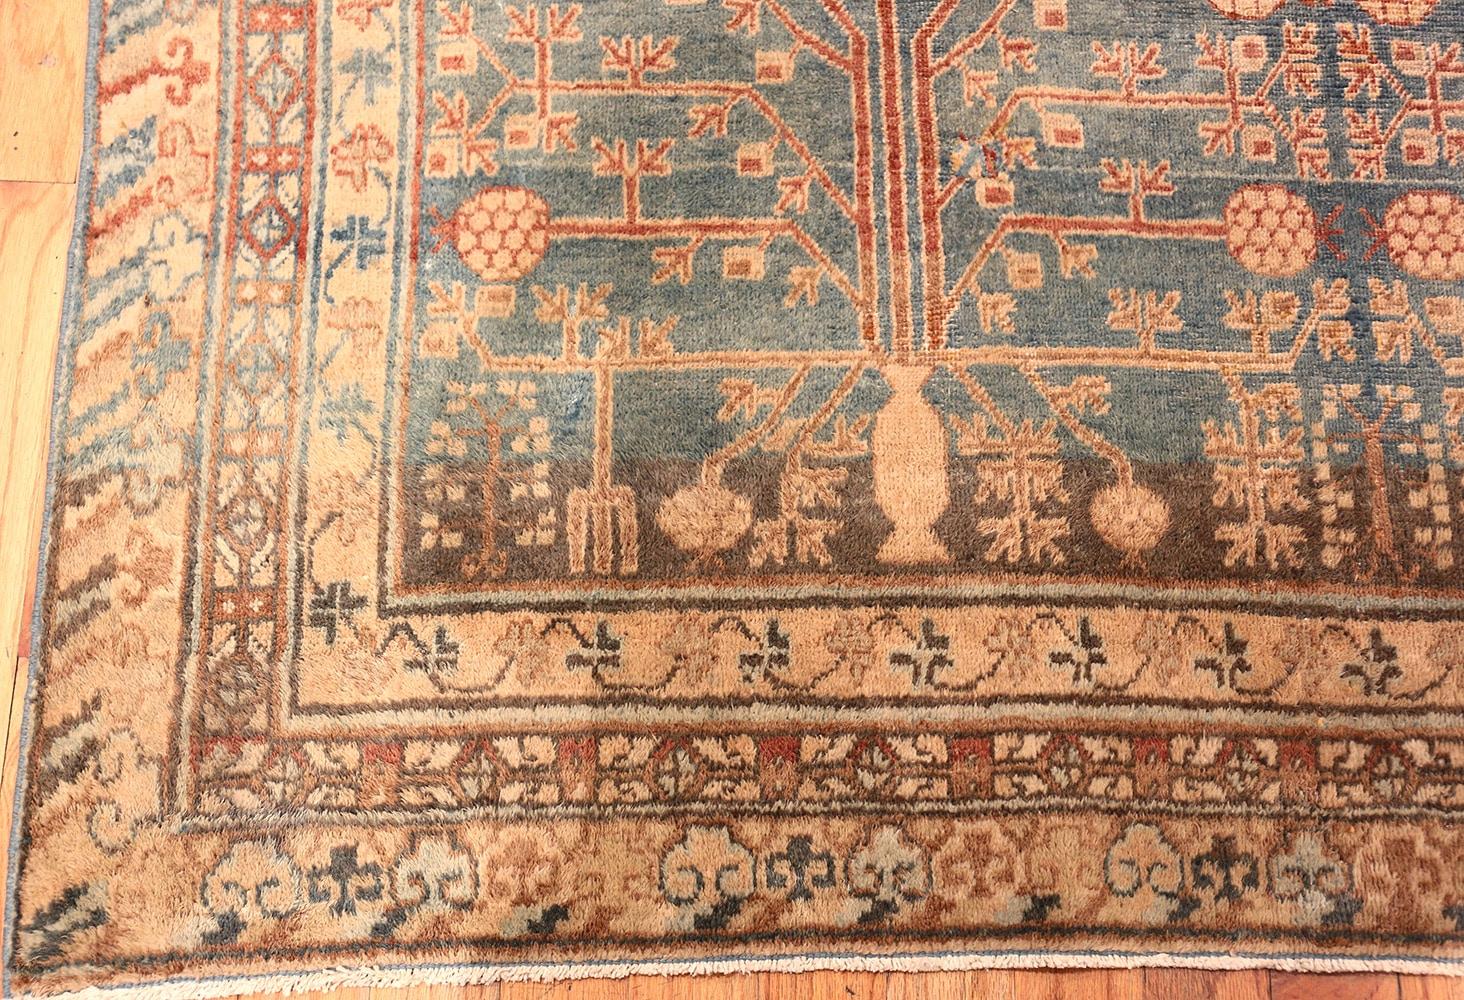 Beautiful long and narrow size blue grey colored background antique pomegranate Khotan rug, country of origin or rug type: East Turkestan rugs, date circa 1900. Size: 6 ft 2 in x 13 ft (1.88 m x 3.96 m)

